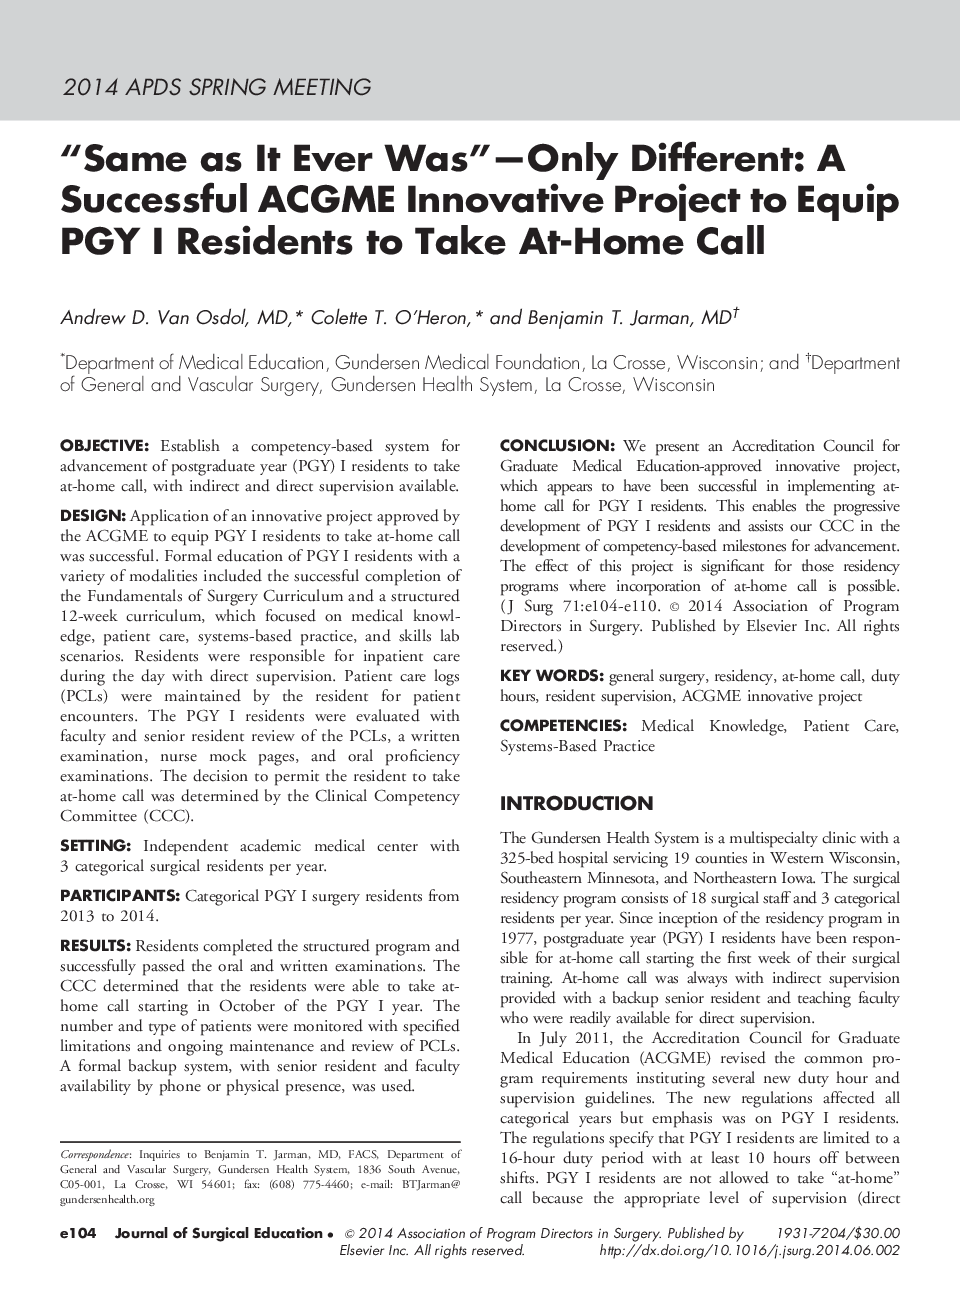 “Same as It Ever Was”—Only Different: A Successful ACGME Innovative Project to Equip PGY I Residents to Take At-Home Call